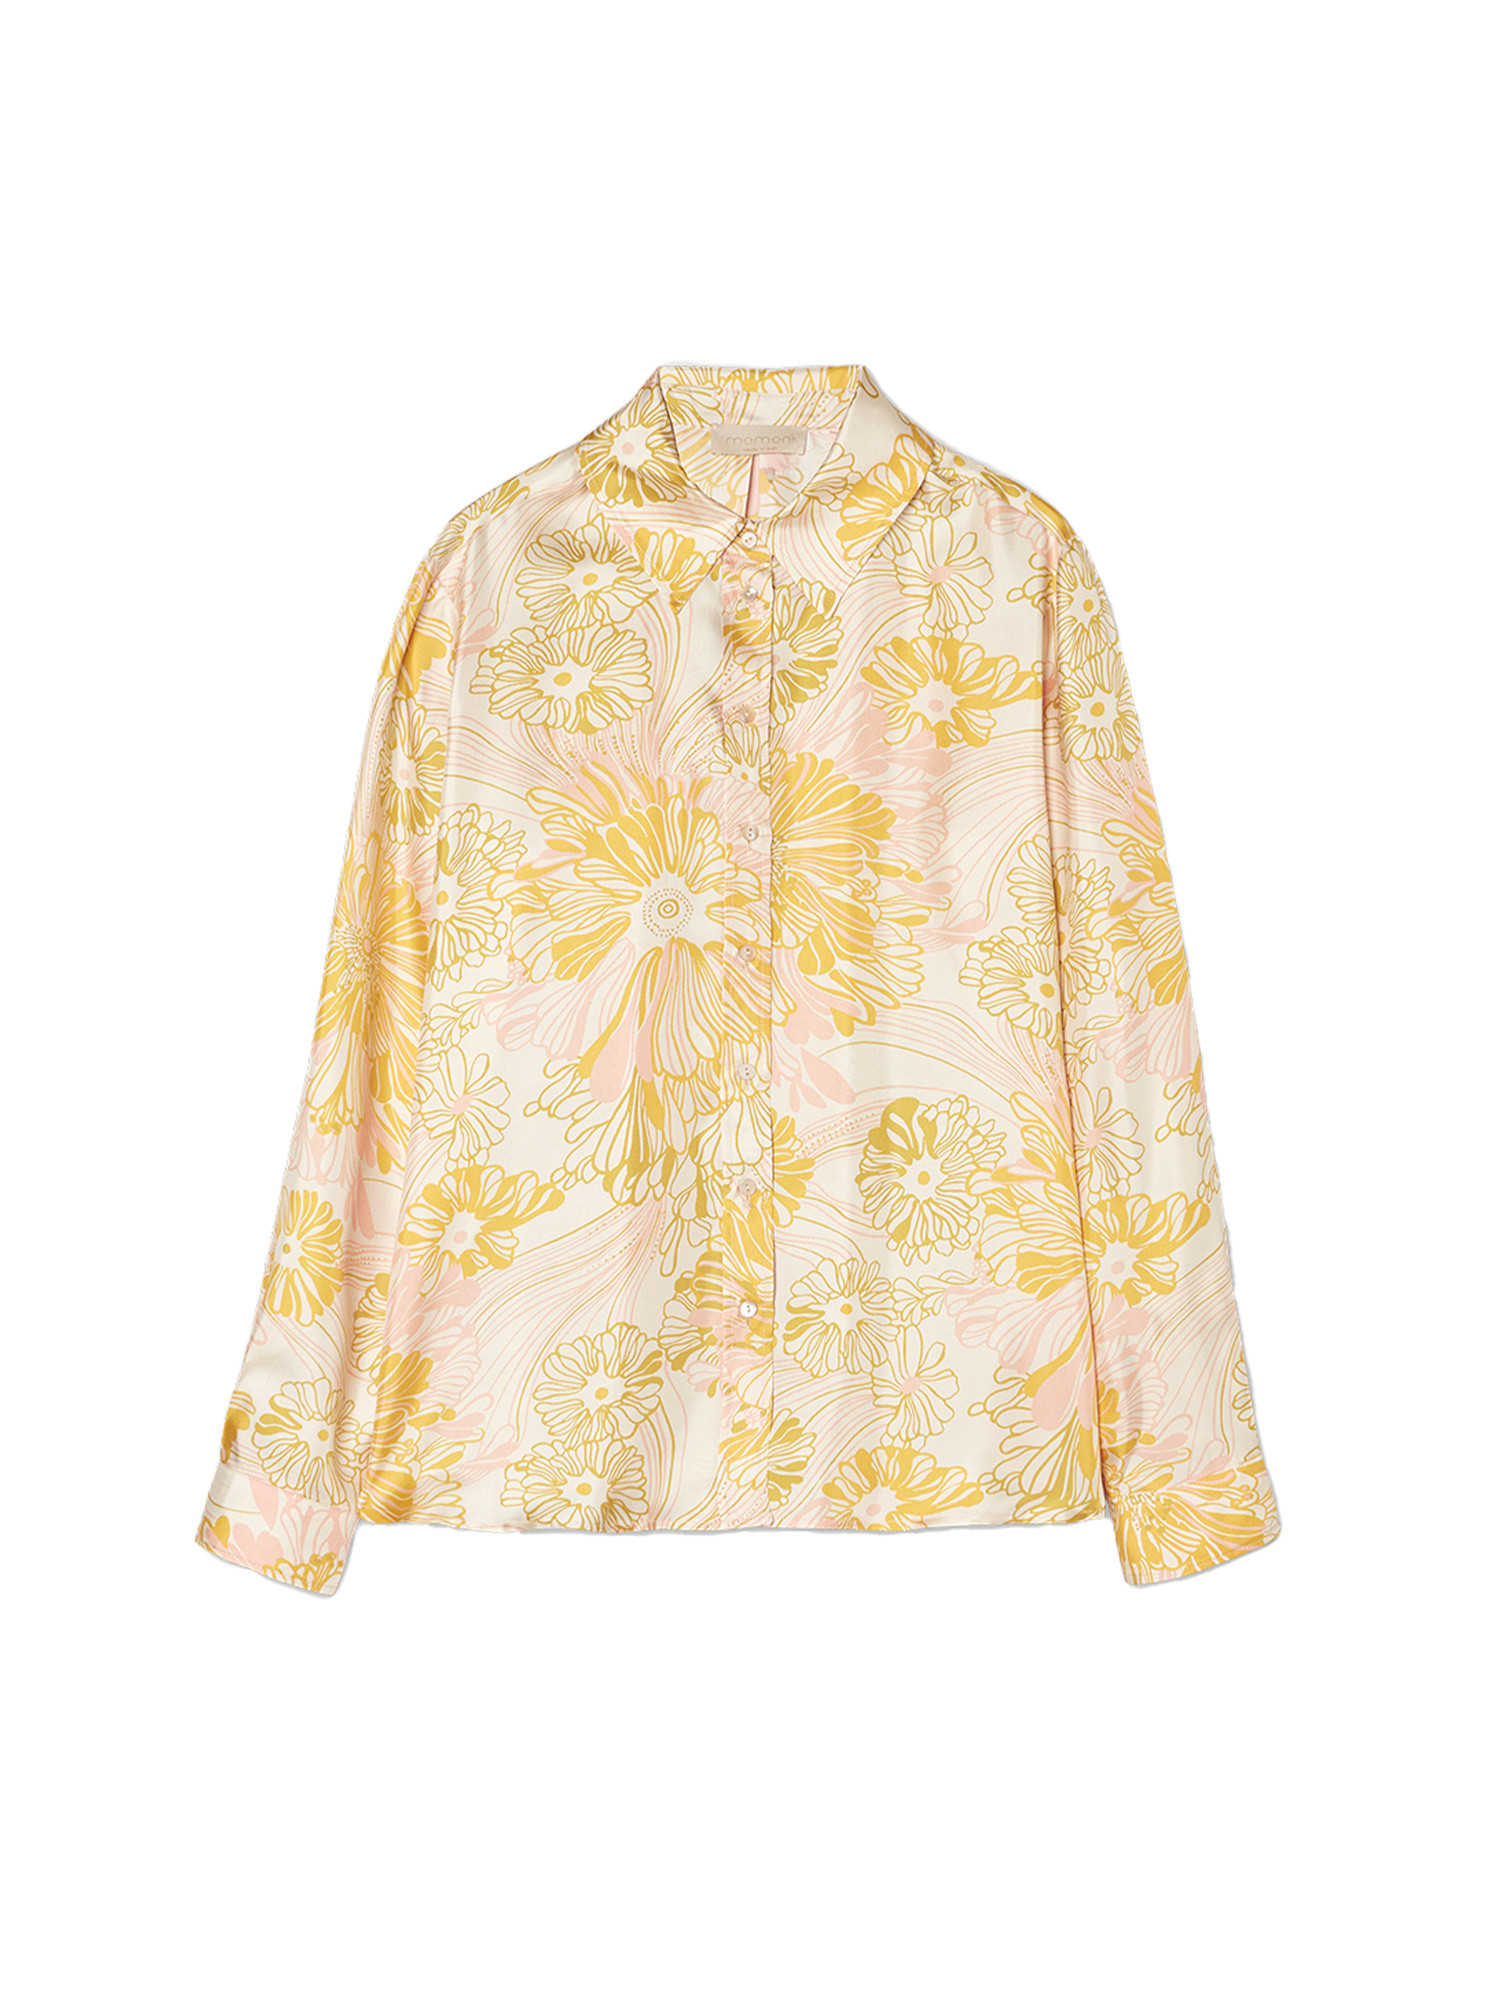 Momonì - Arles shirt in printed silk twill, Light Yellow, large image number 0